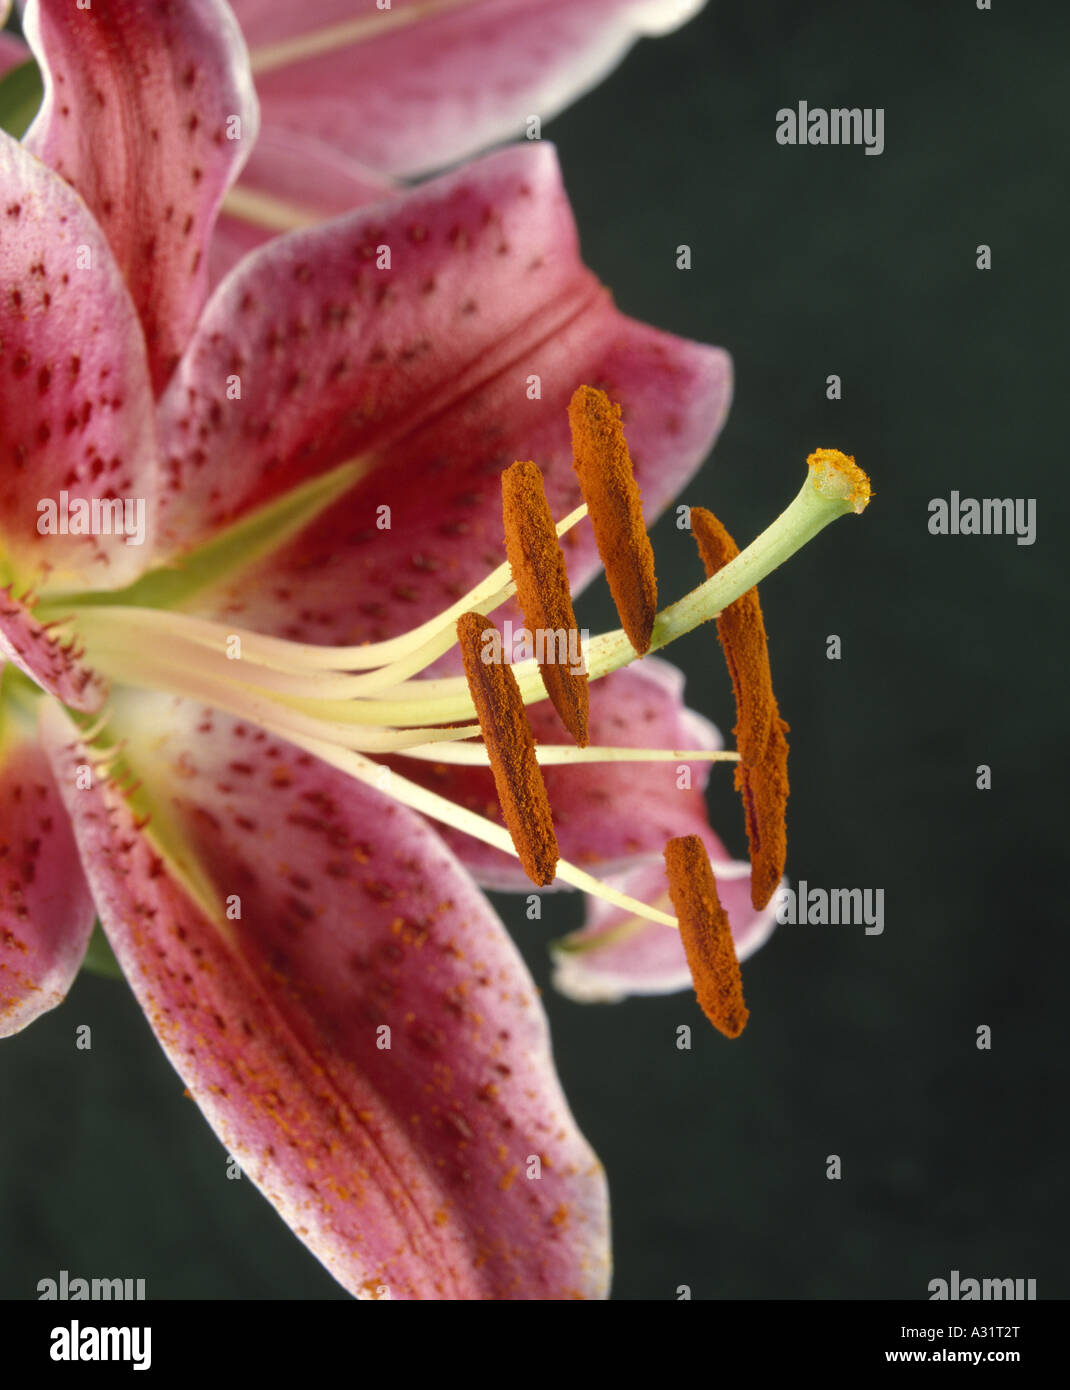 LILY 'STAR GAZER' (LILIUM SP) SHOWING PISTIL AND STAMEN WITH POLLEN IN STIGMA AND PETALS / STUDIO Stock Photo